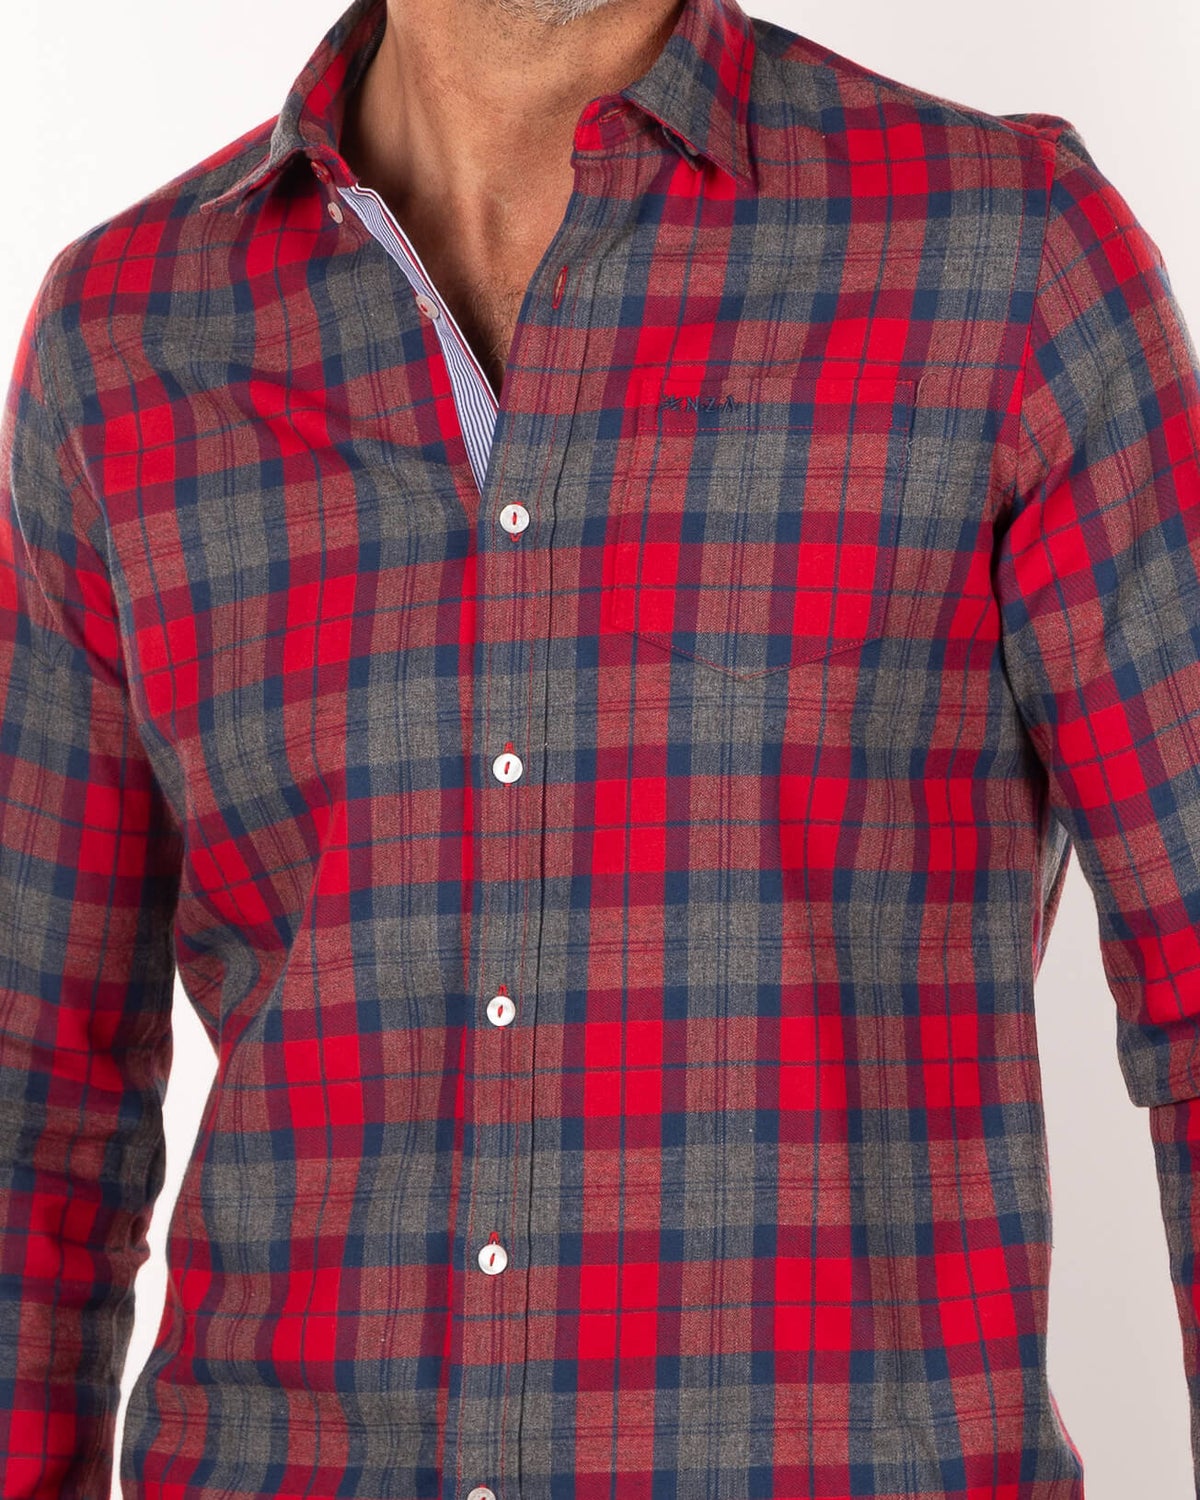 Red and black cotton flannel shirt - Carmine red